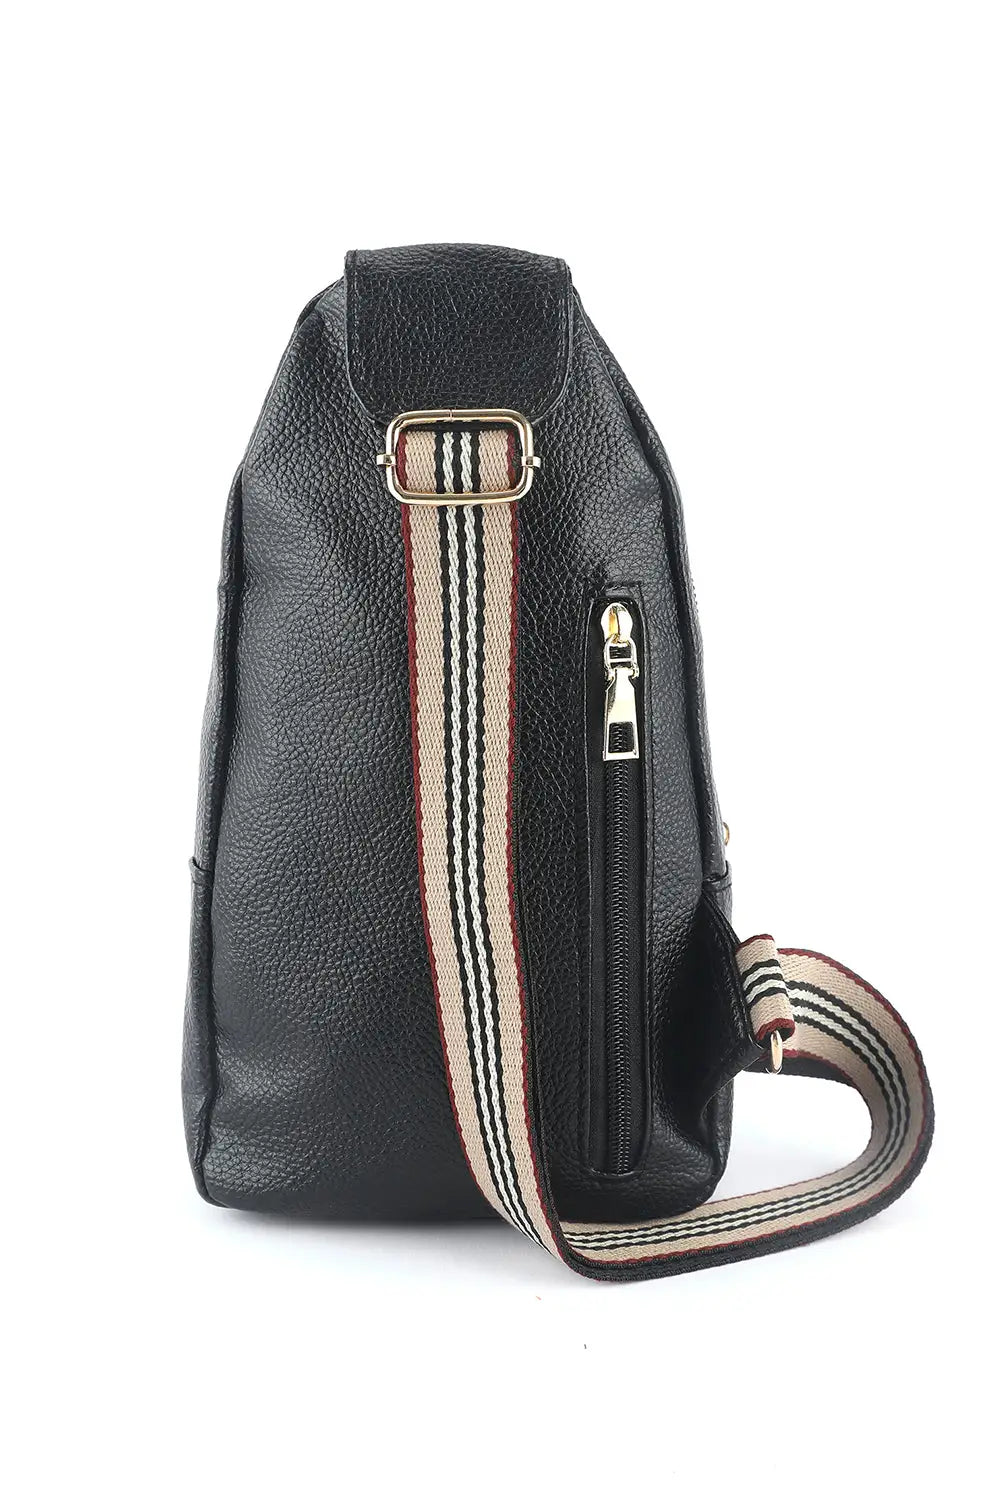 Brown faux leather multi-pockets zipped chest bag - black / one size / pu - crossbody bags